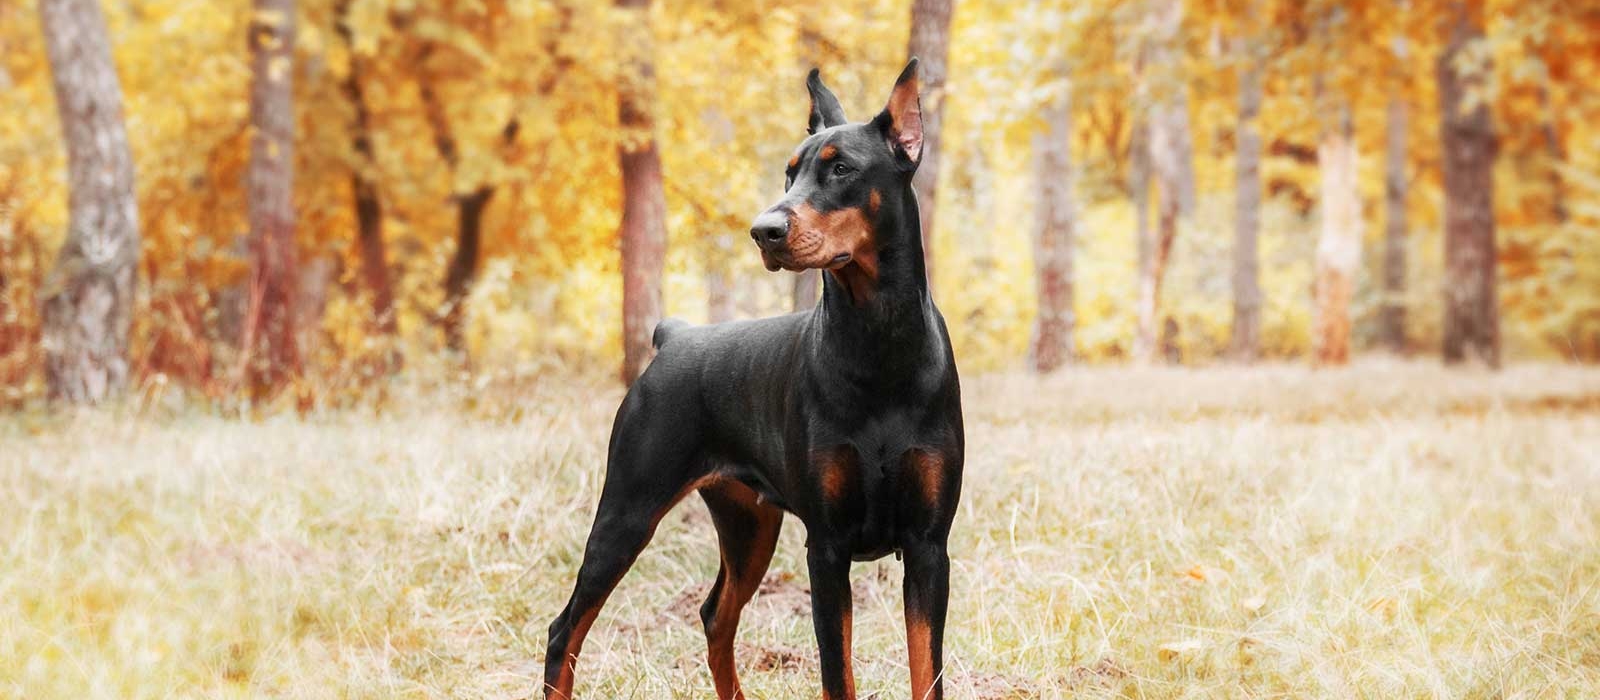 Best 5 Guard Dogs To Protect Your Home & Family